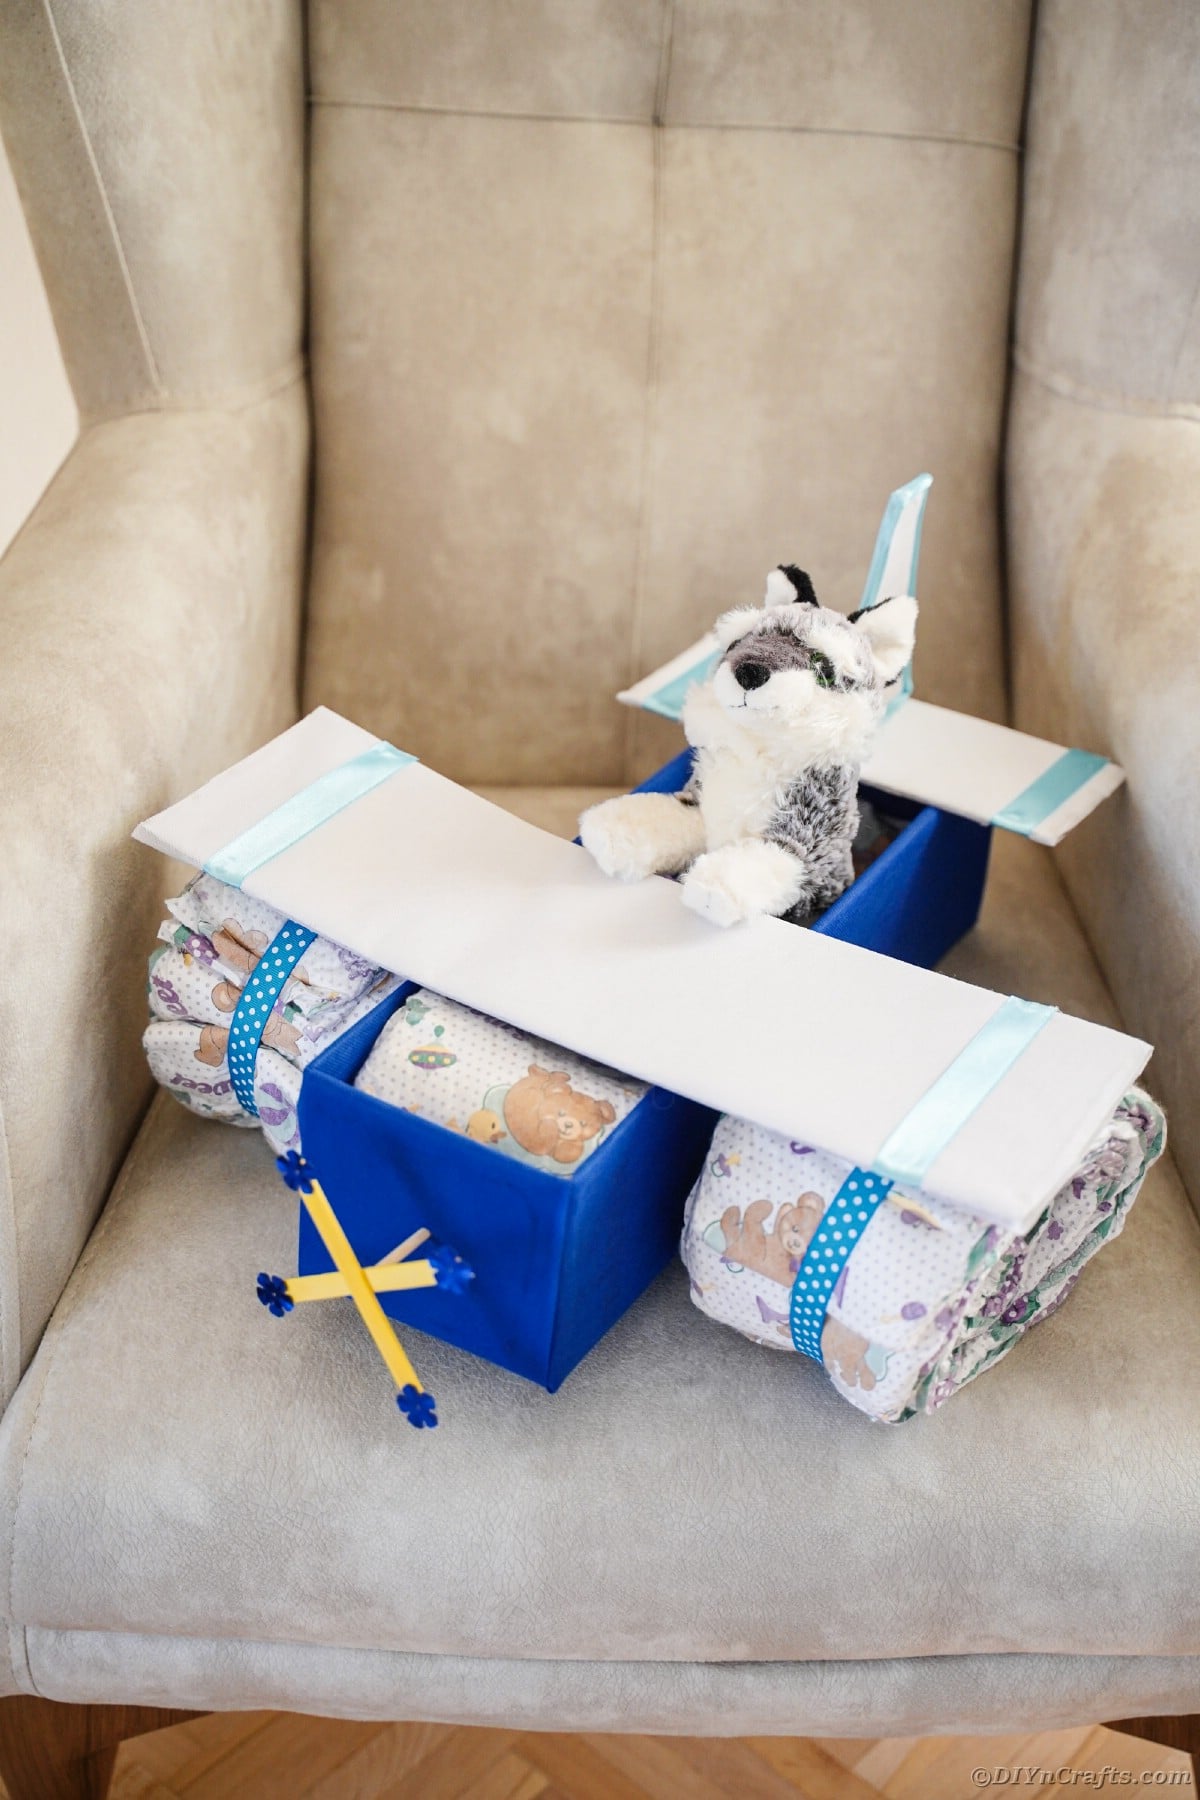 Diaper cake on chair